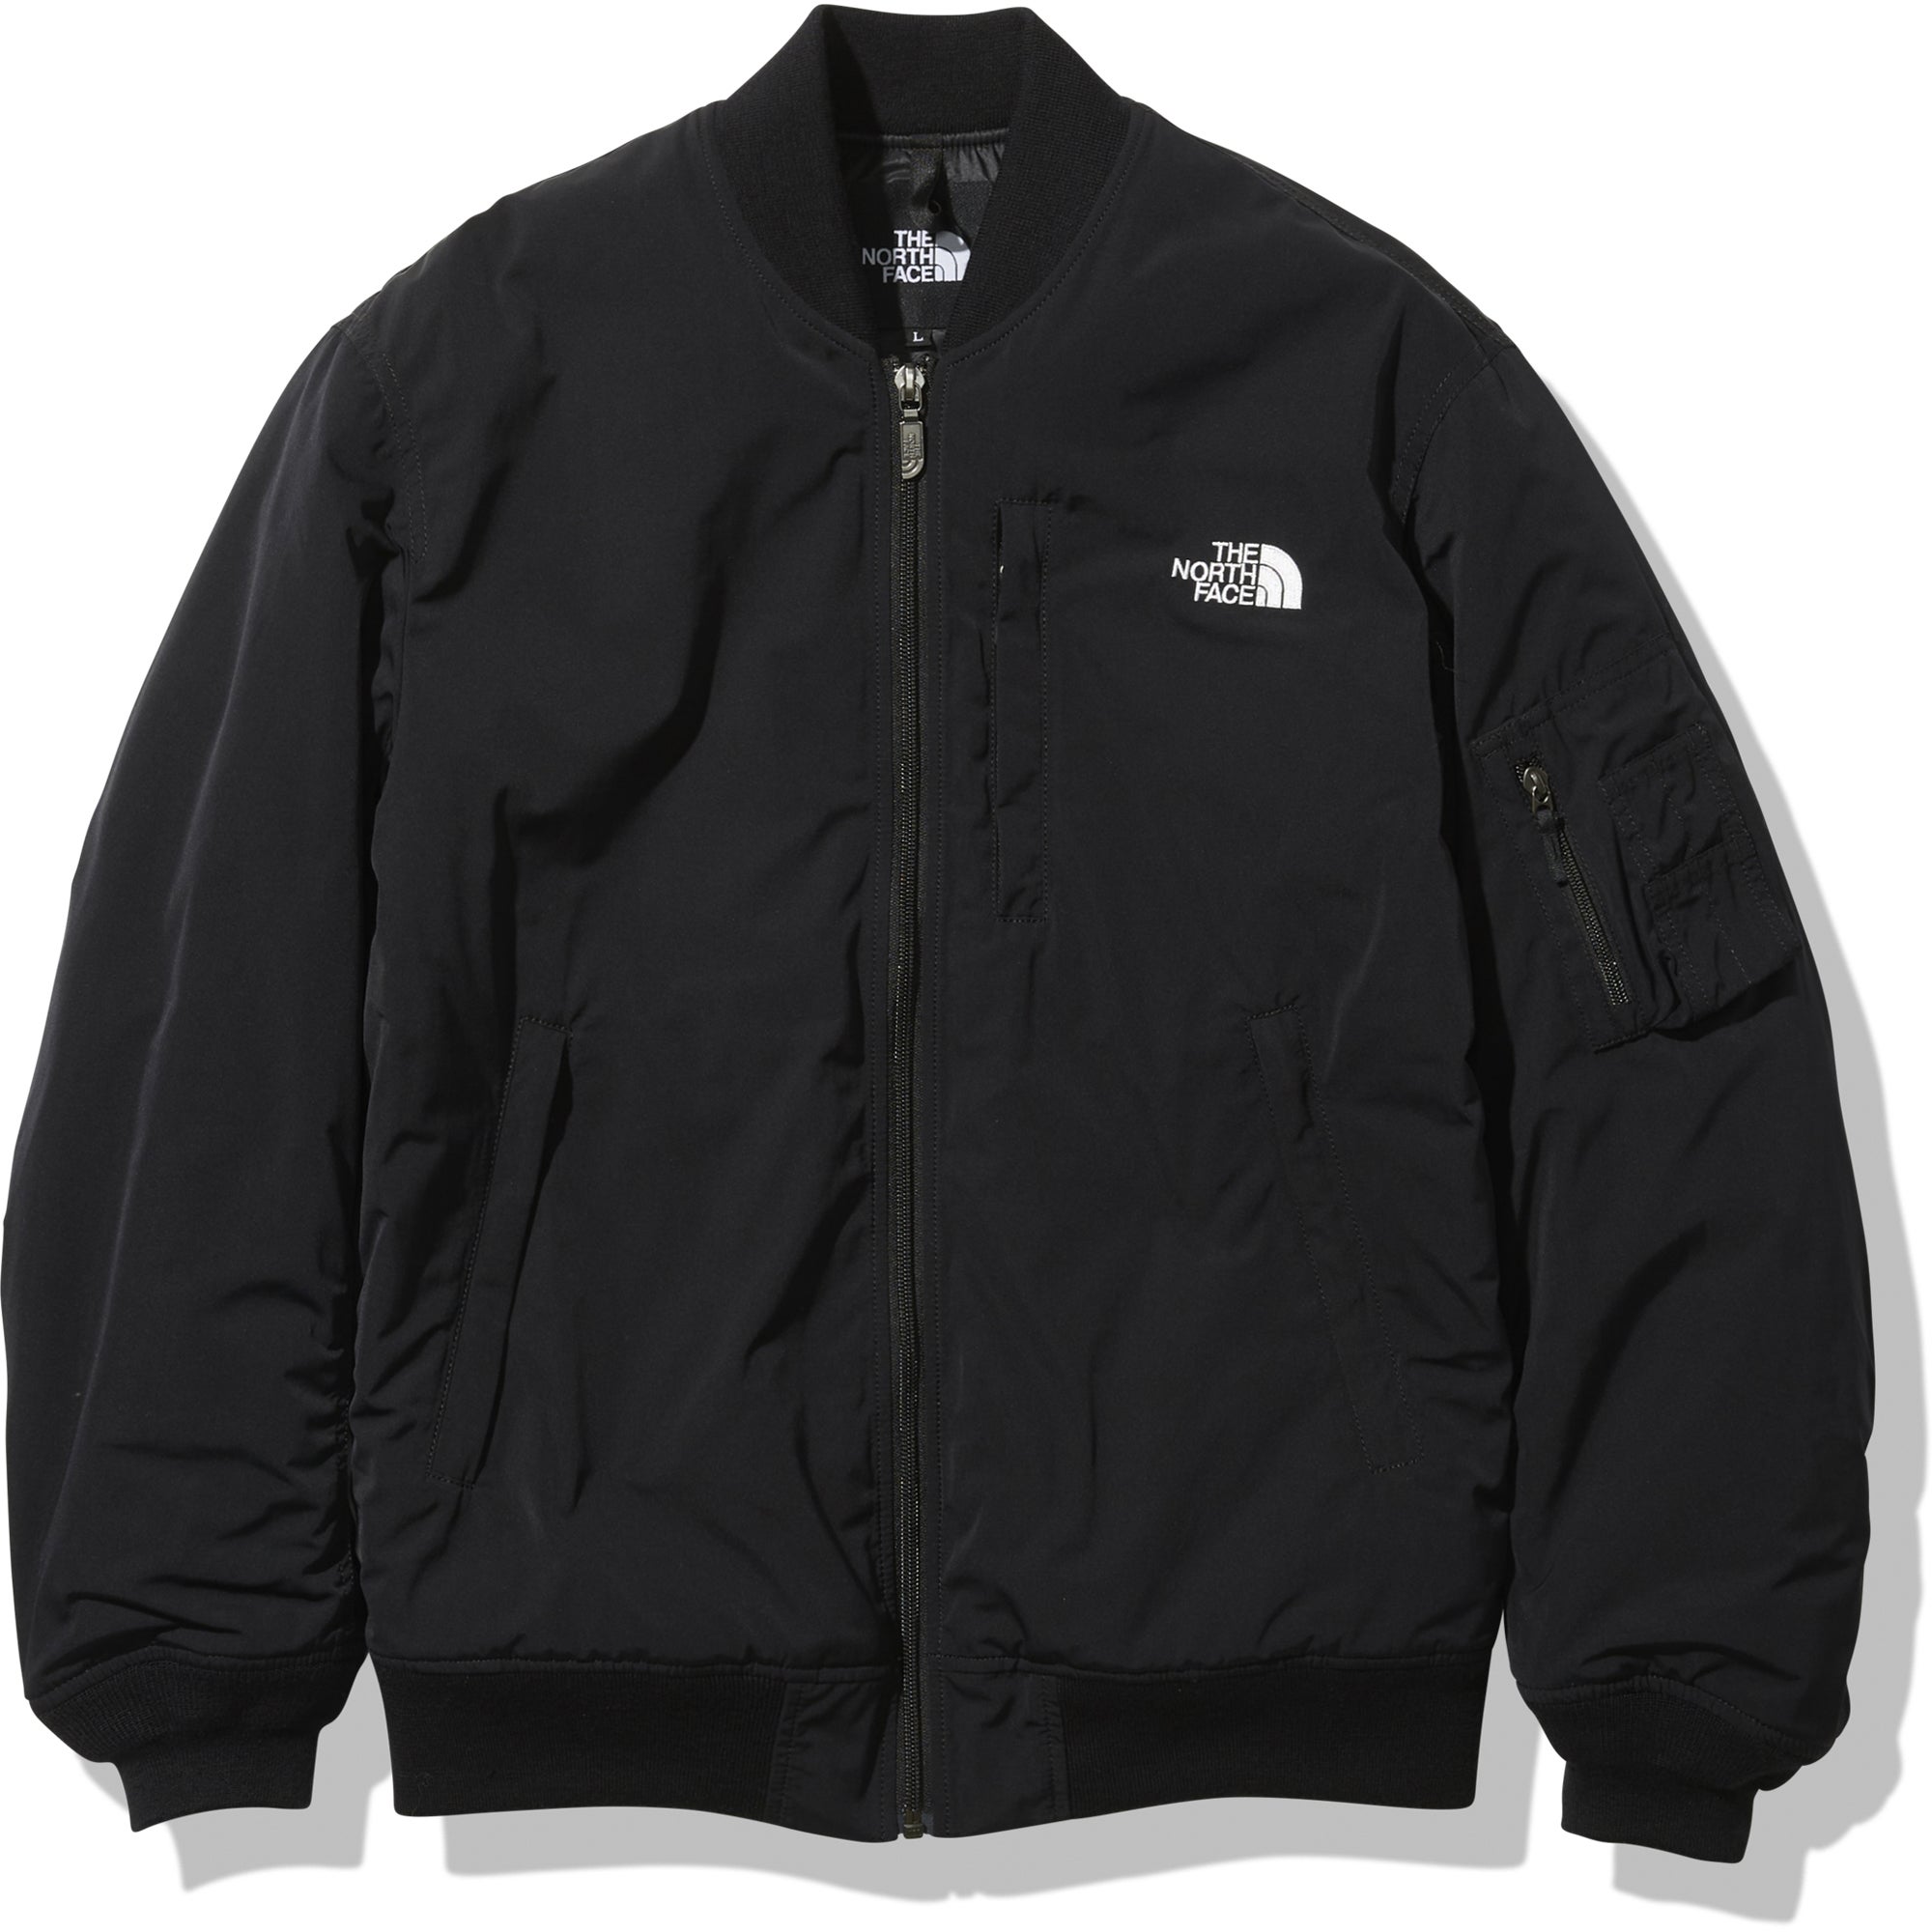 THE NORTH FACE｜22AW先行予約 8月20日(土)スタート | ARKnets BLOG